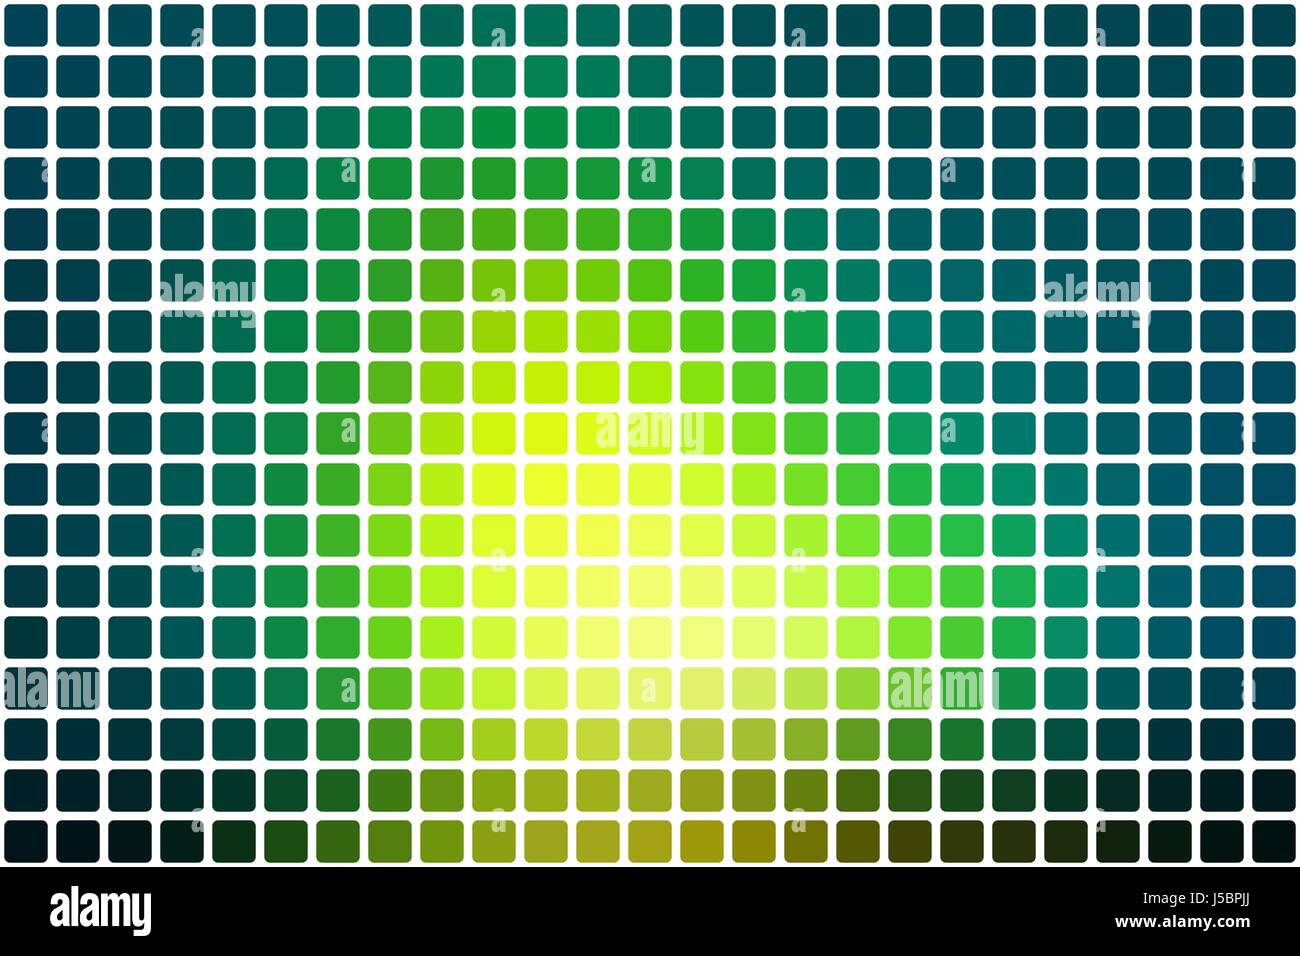 Bright yellow green vector abstract mosaic background with rounded corners square tiles over white Stock Vector